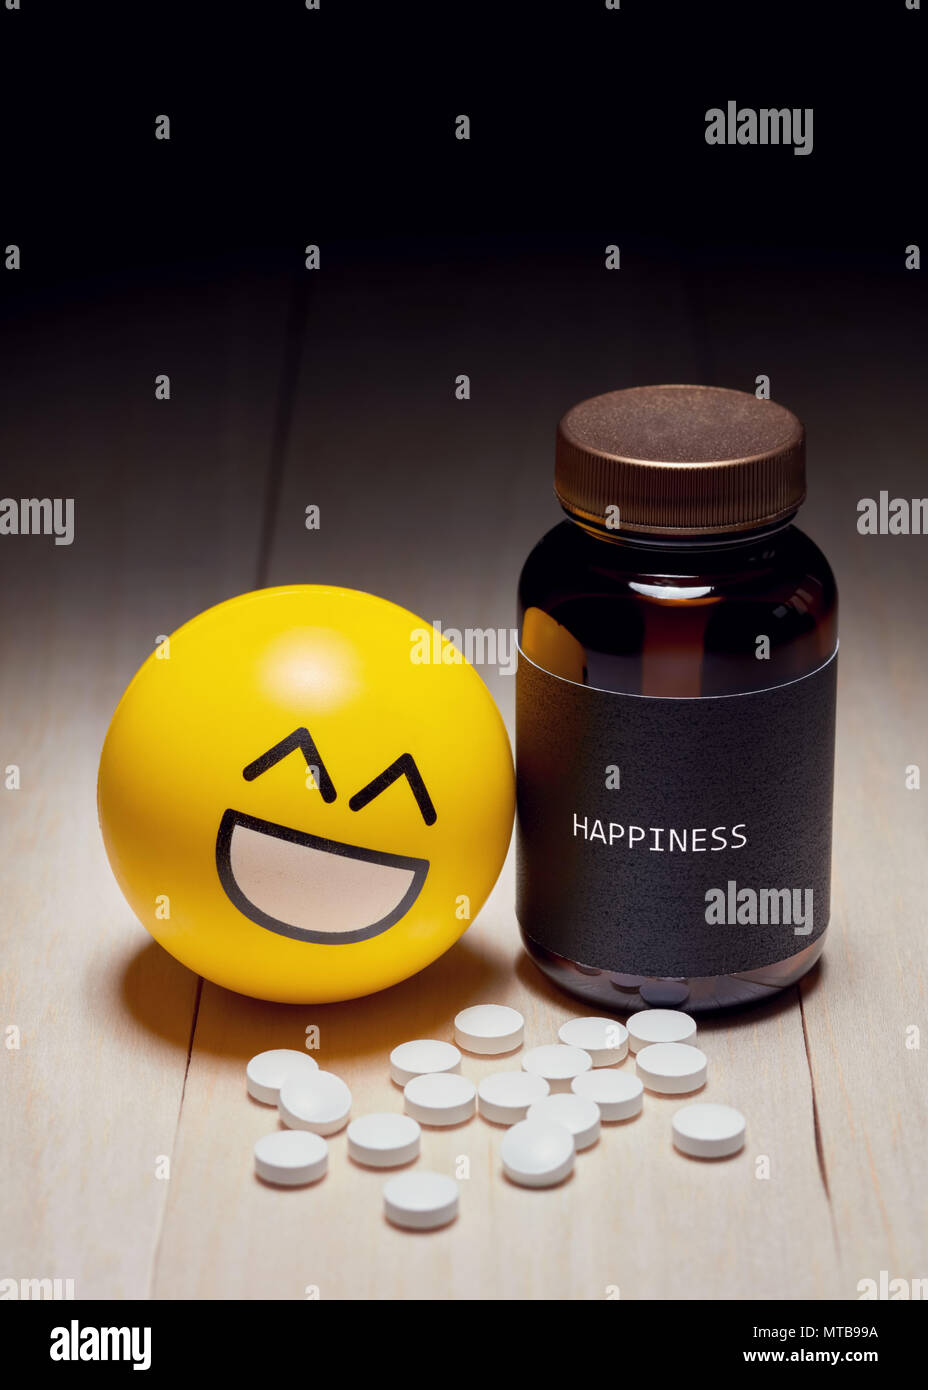 Anti-depressant drug use and happiness concept. Yellow smiling emoji reclined to a drug container with a black label written happiness on it. Editoria Stock Photo